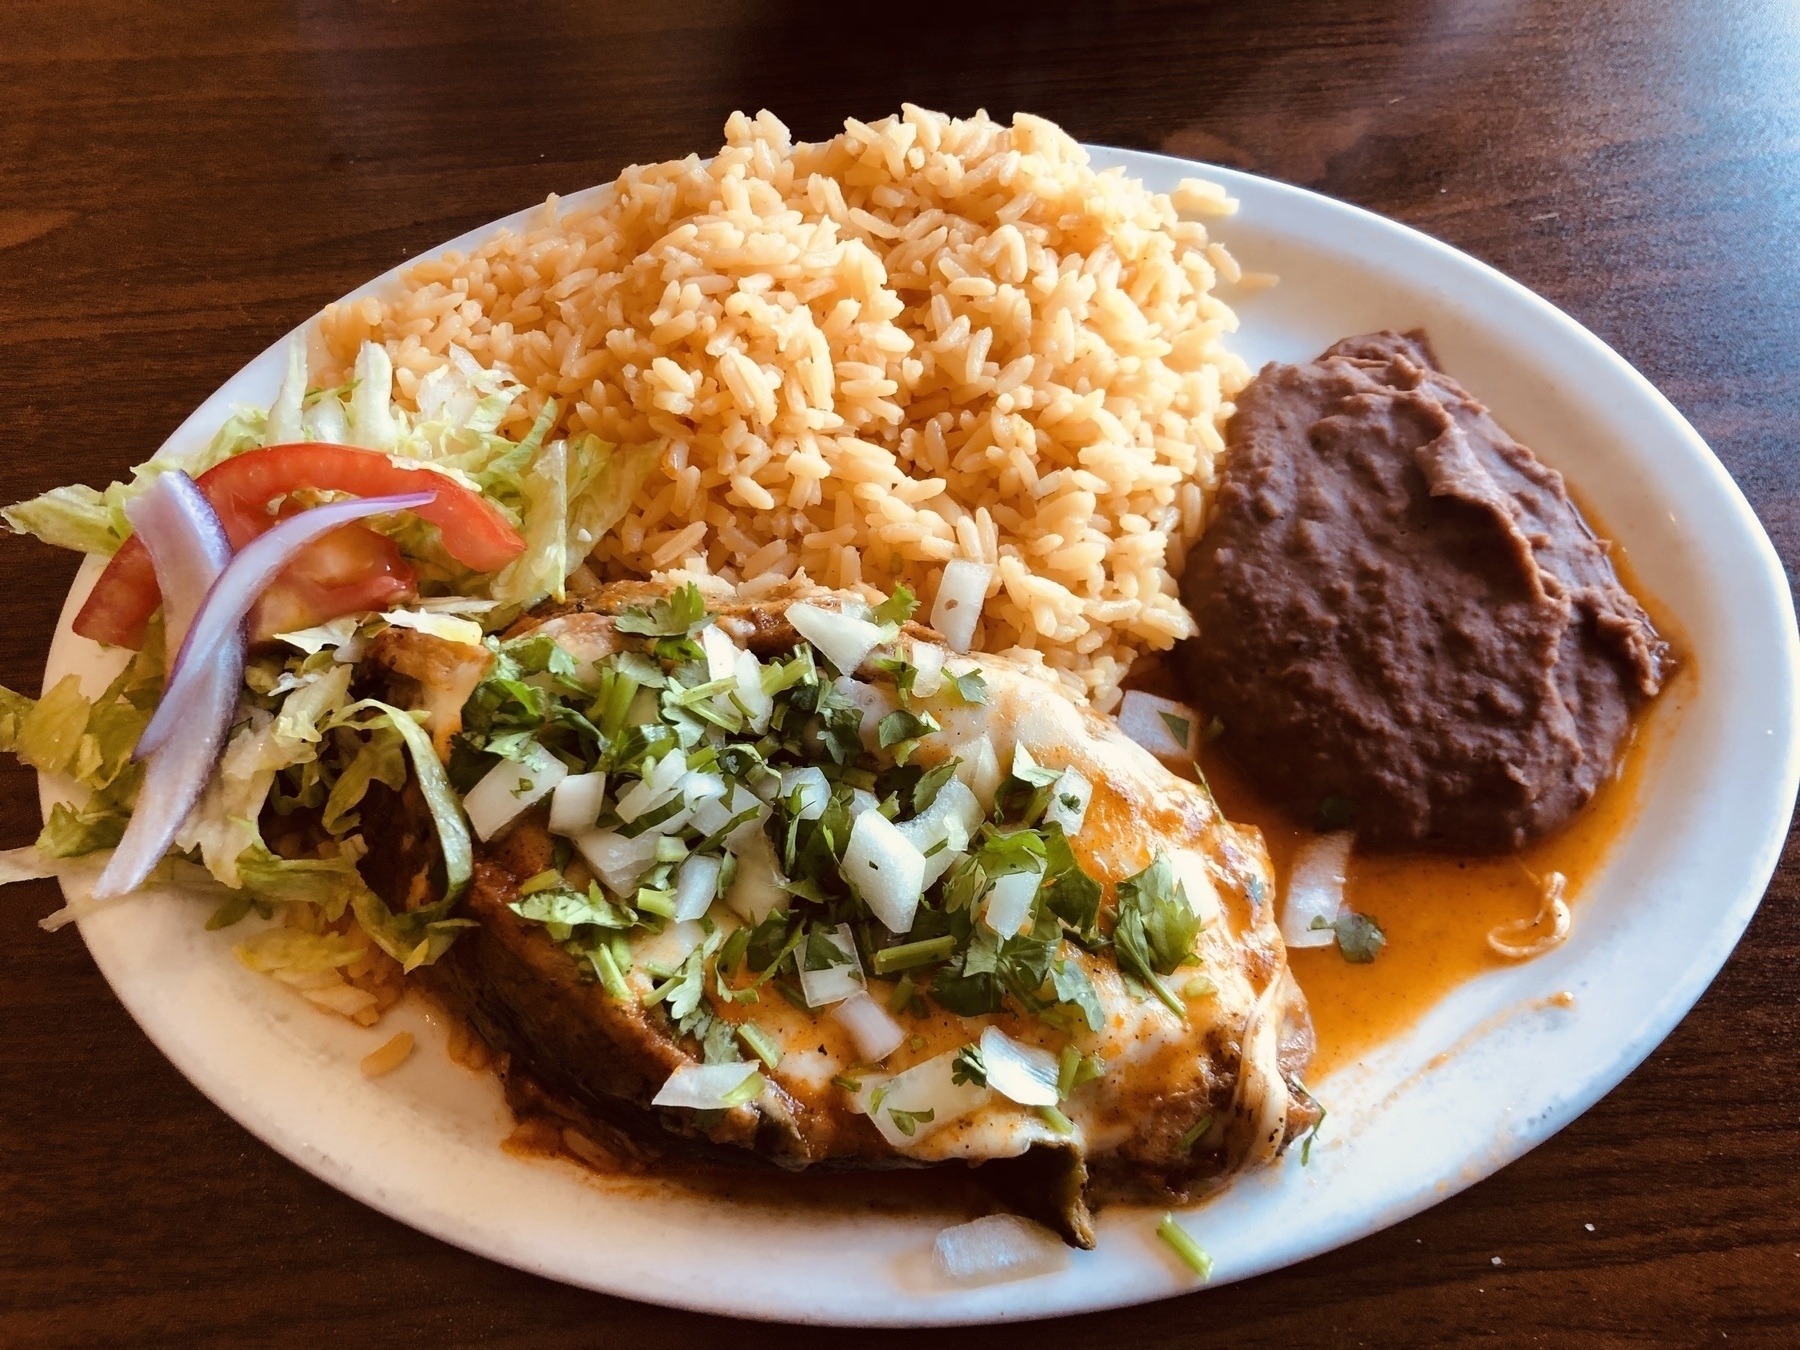 A chile rellenos with rice, a small salad and refried beans.